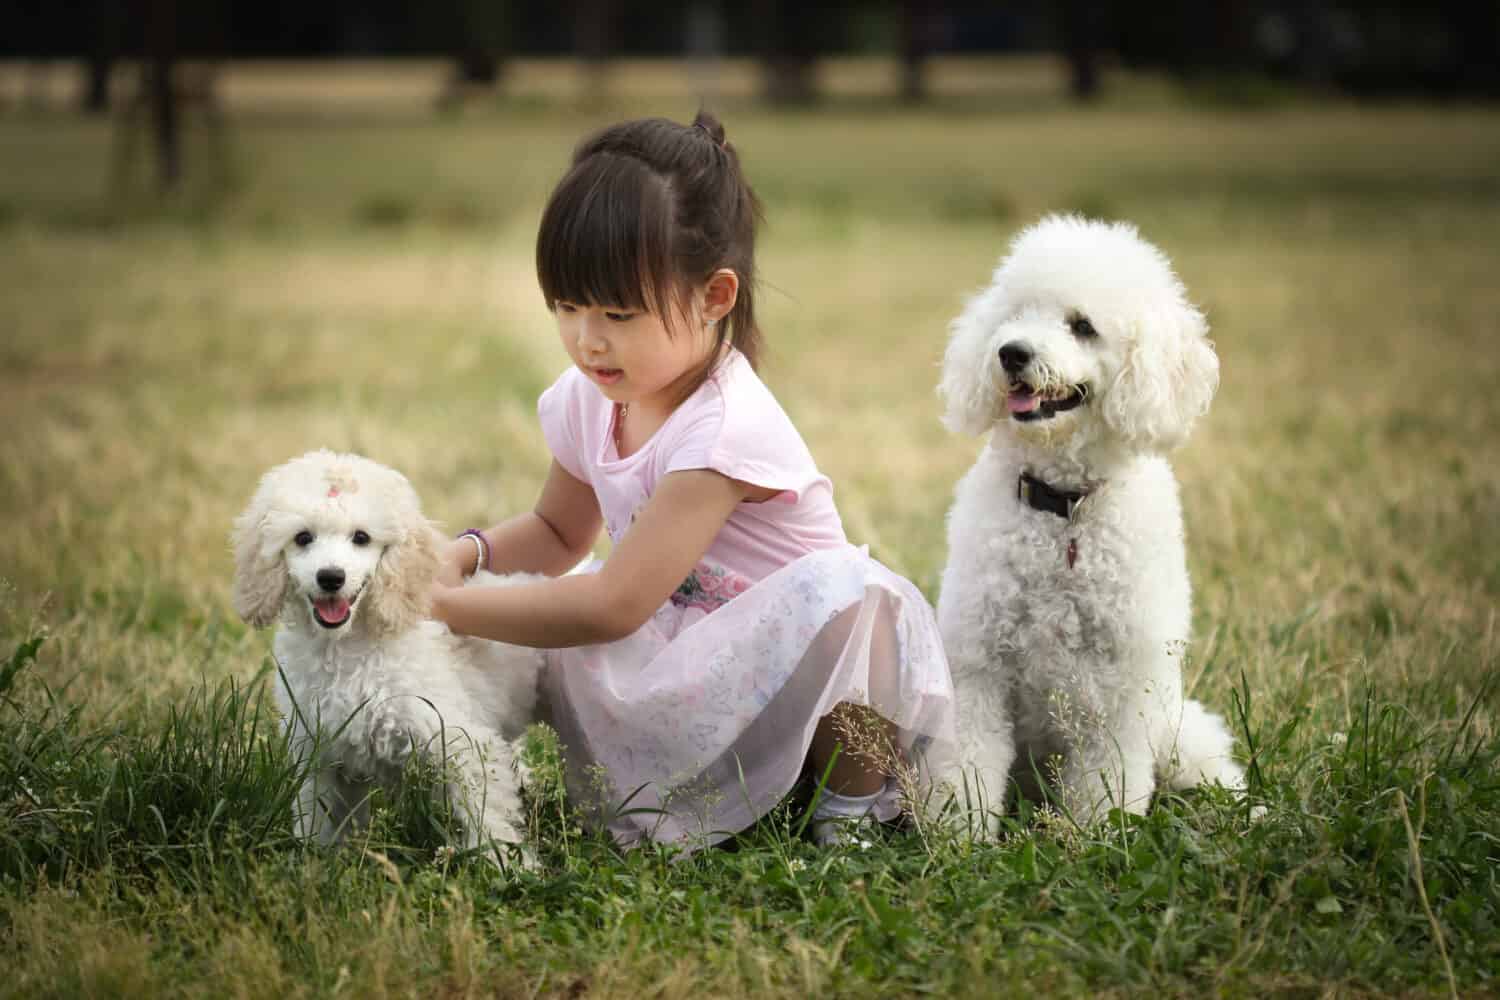 Asian kid playing with a toy poodle dog